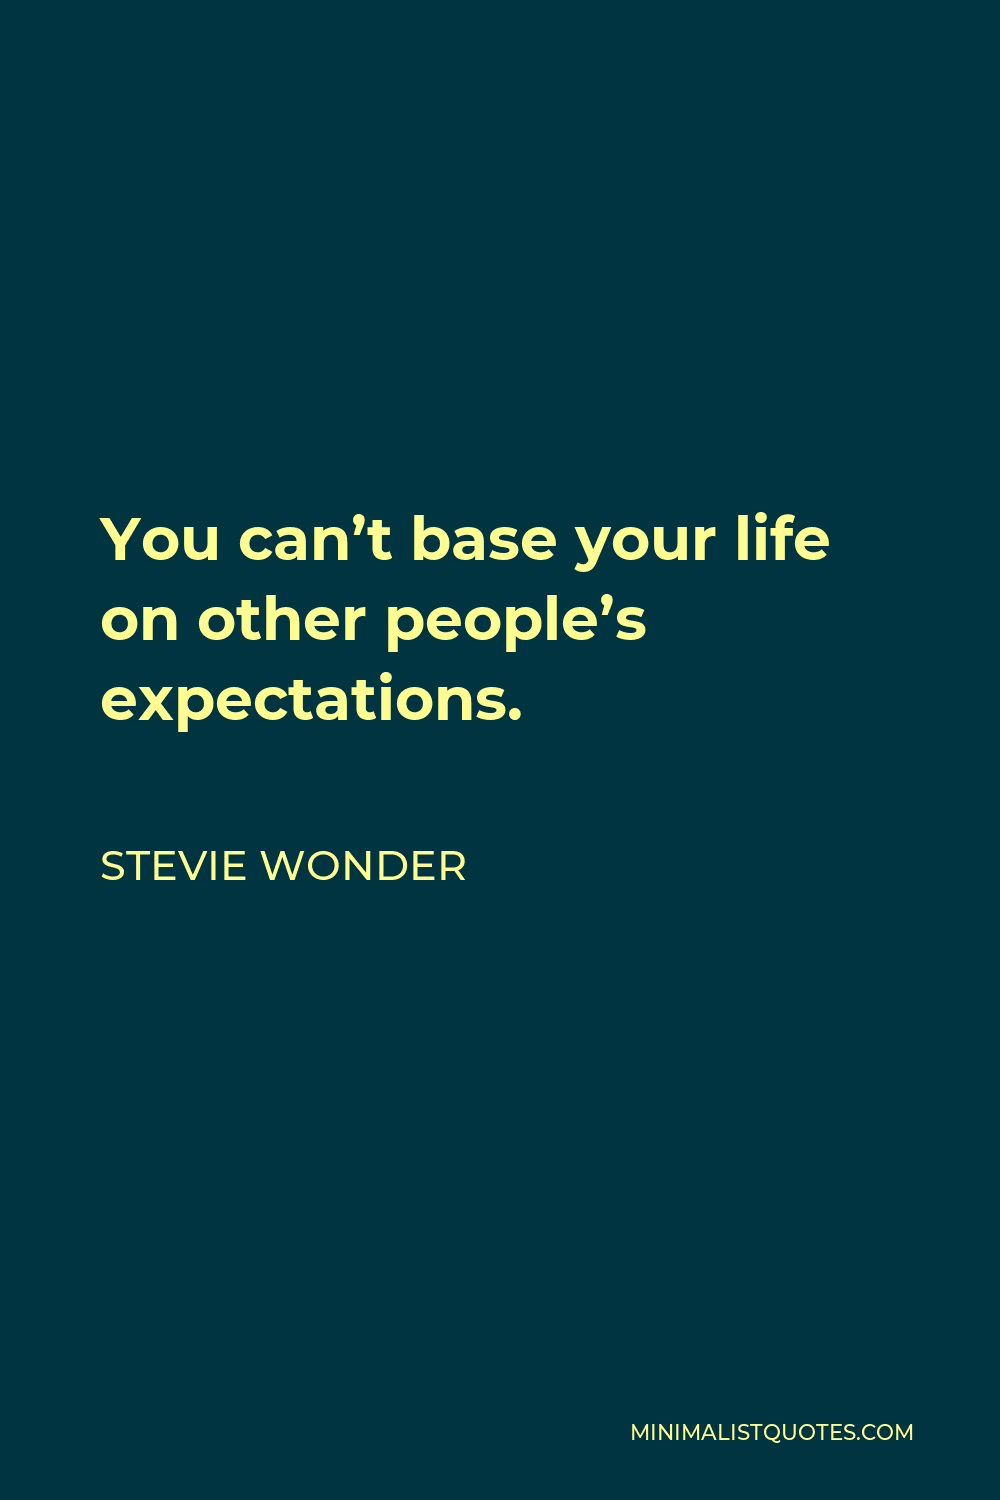 Stevie Wonder Quote - You can’t base your life on other people’s expectations.